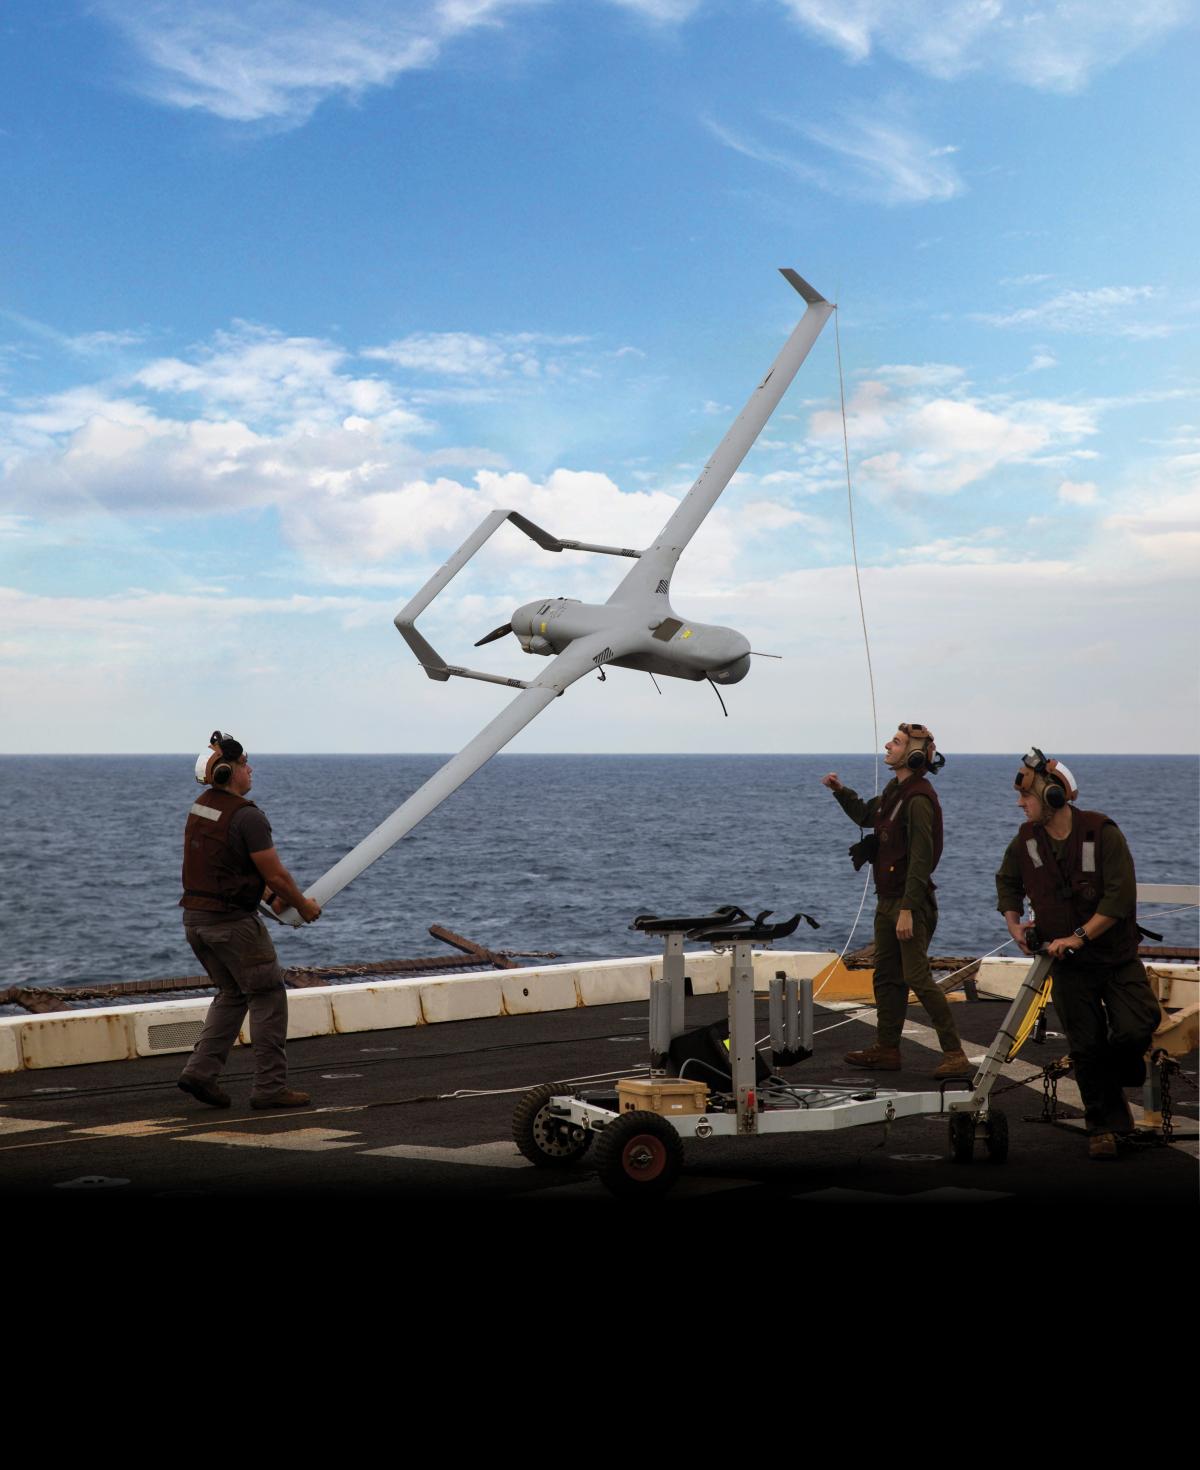 Marines with Marine Medium Tiltrotor Squadron 365 Reinforced lower an RQ-21A Blackjack unmanned aerial surveillance aircraft down from the STUAS recovery system using the vertical capture rope as the 24th Marine Expeditionary Unit and USS Mesa Verde (LPD-19).